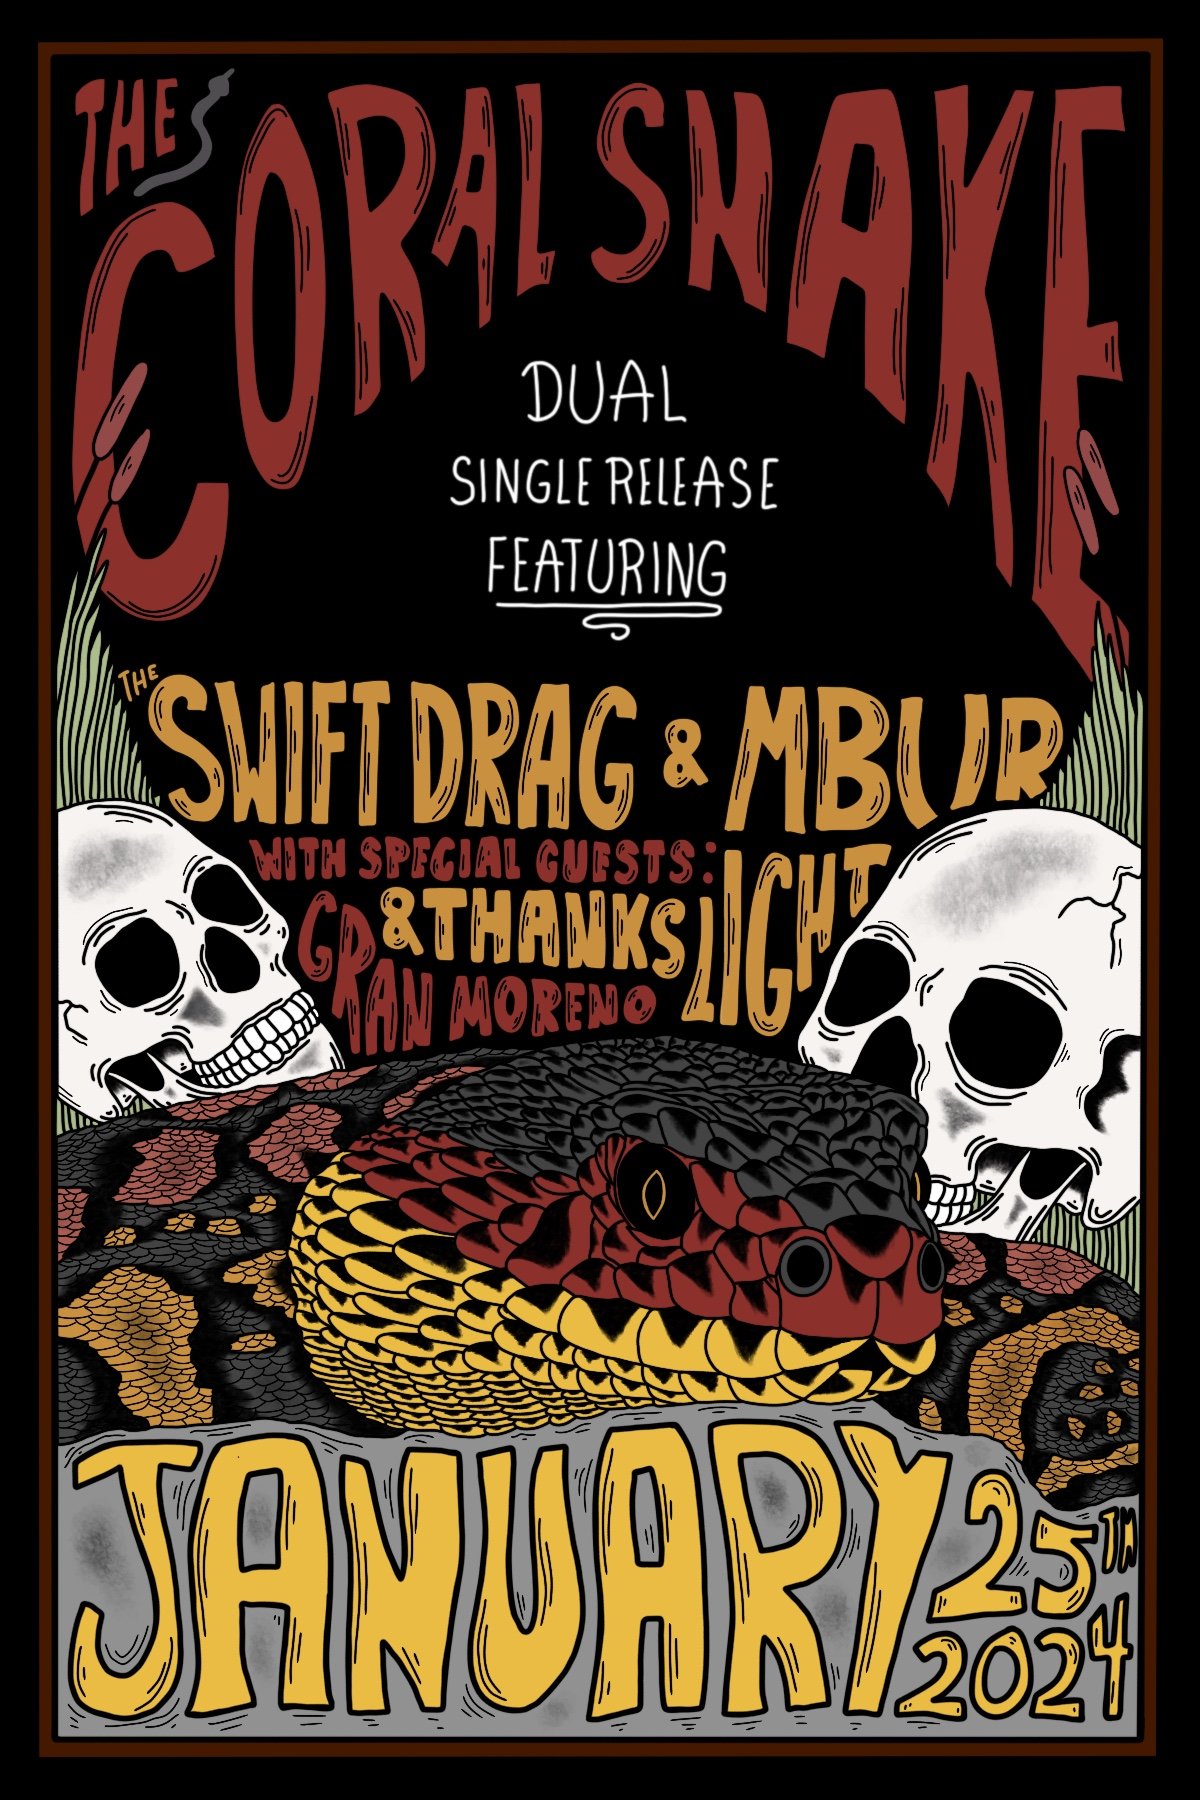 The Coral Snake "Show Poster"